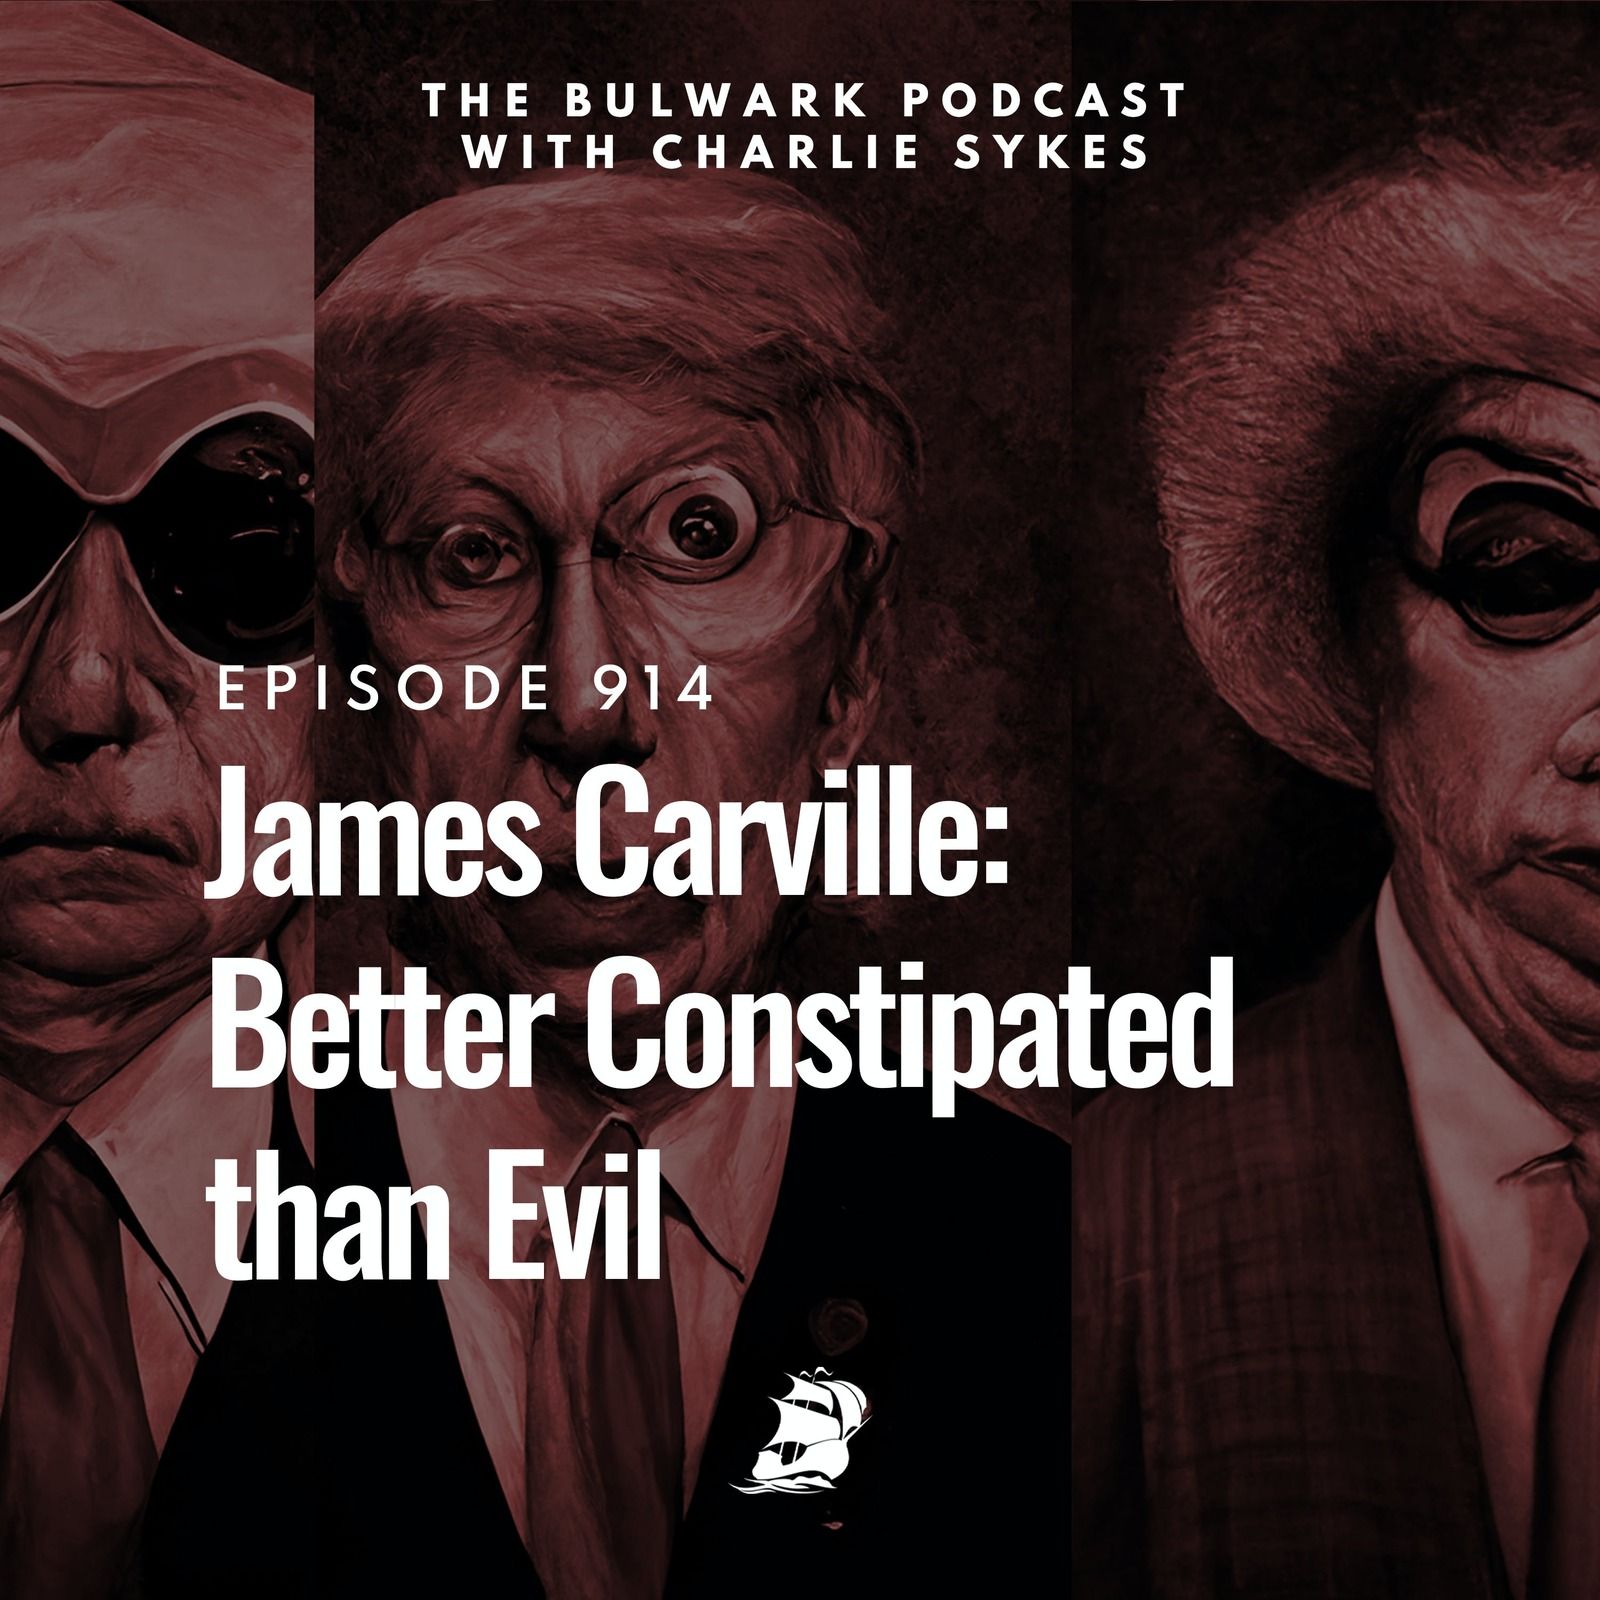 James Carville: Better Constipated than Evil